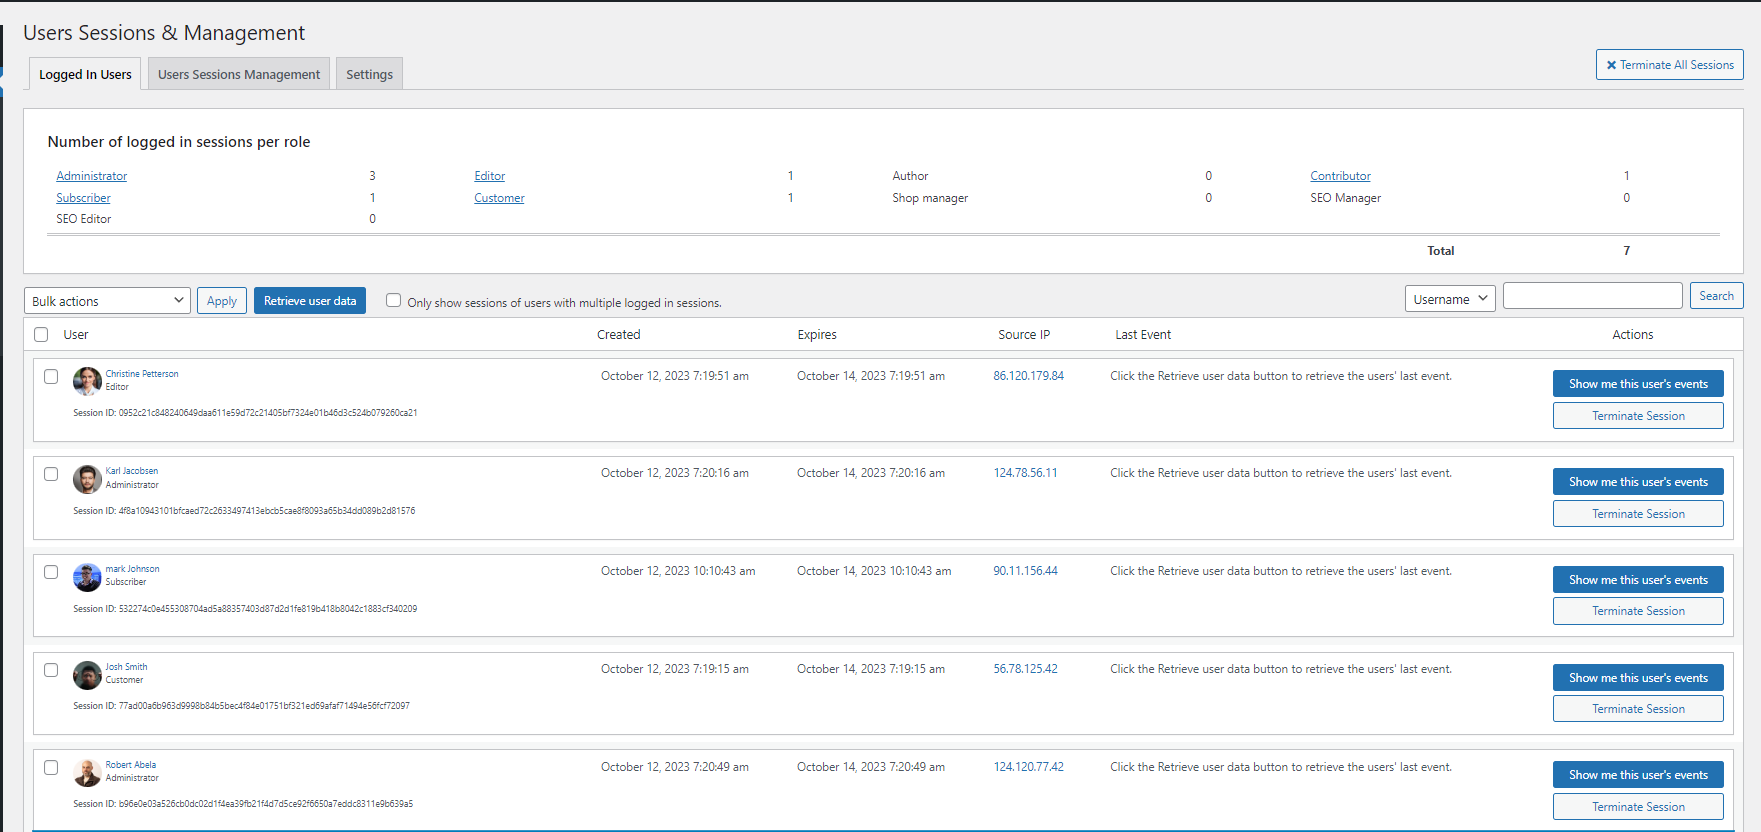 See who is logged in to your WordPress and manage users sessions with Users Sessions Management in the Premium edition.